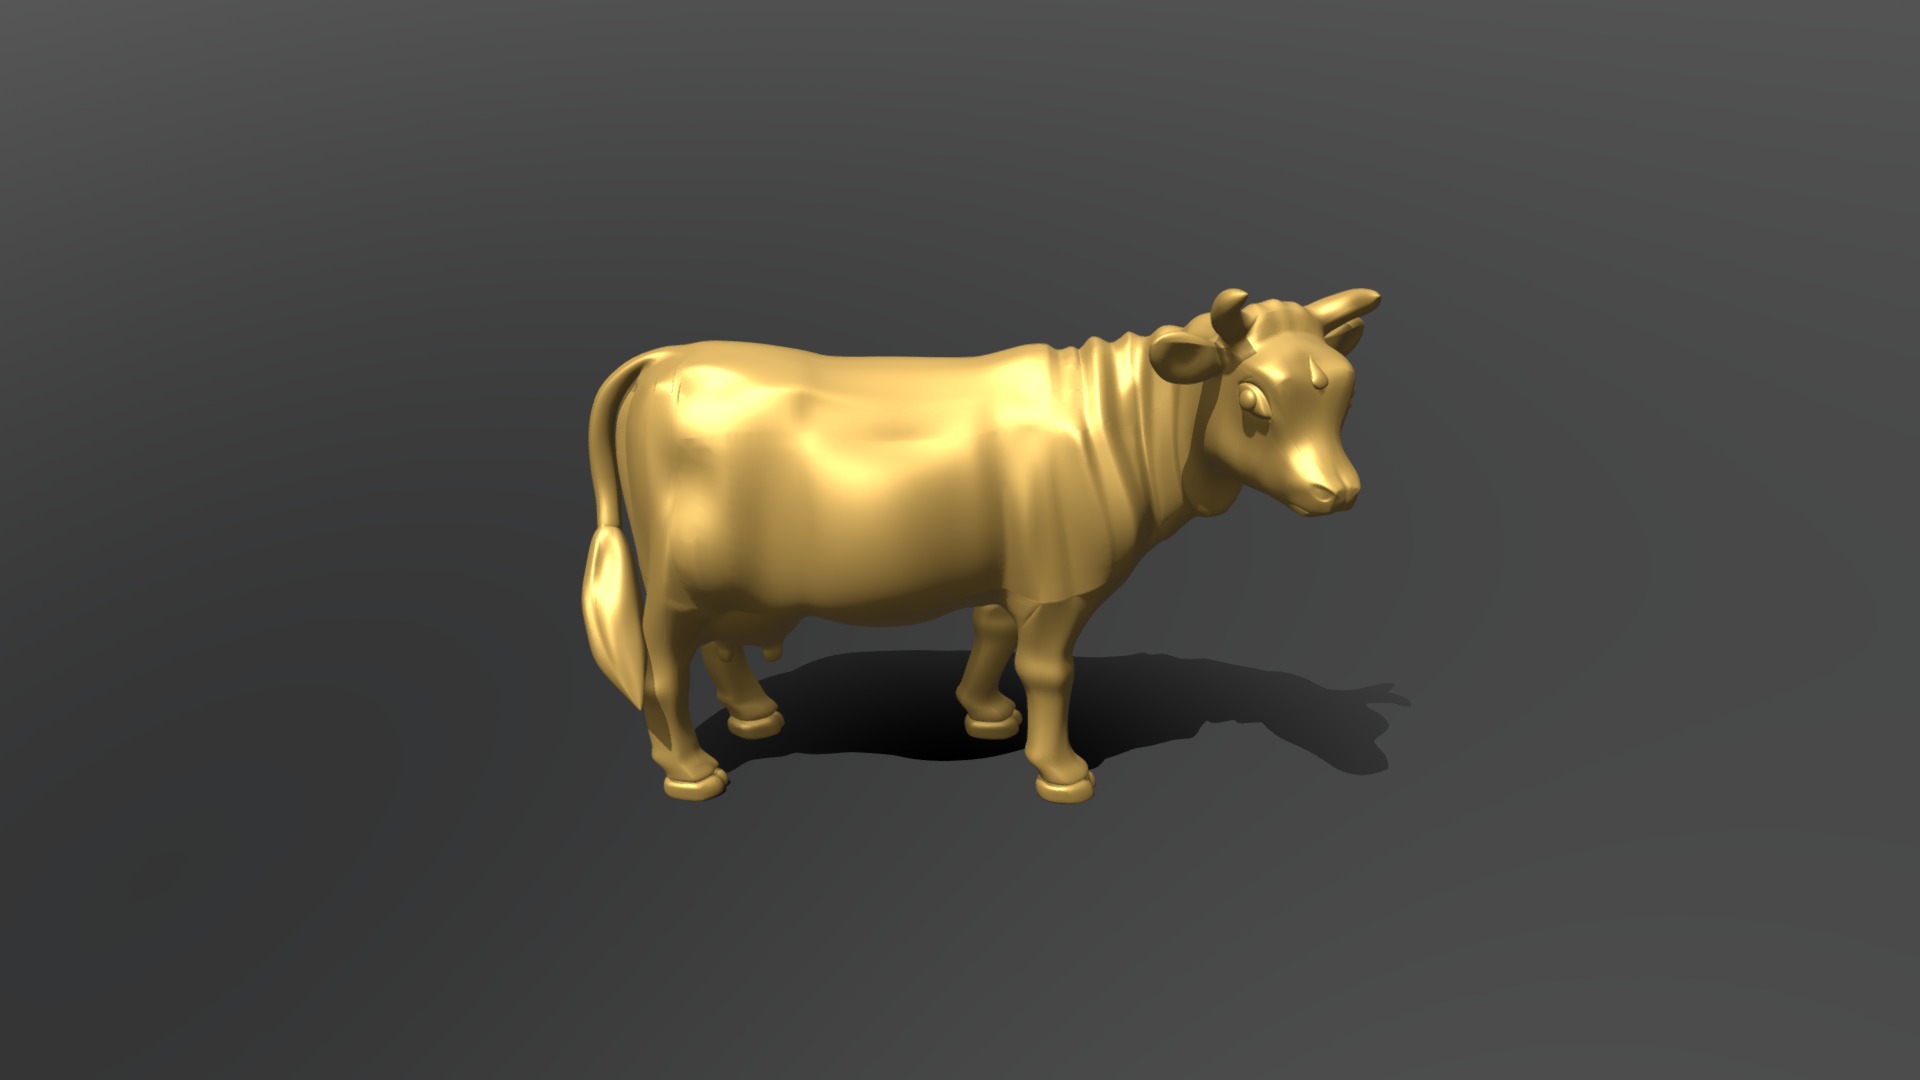 3D model The Cow 3d Model - This is a 3D model of the The Cow 3d Model. The 3D model is about a small statue of a bull.